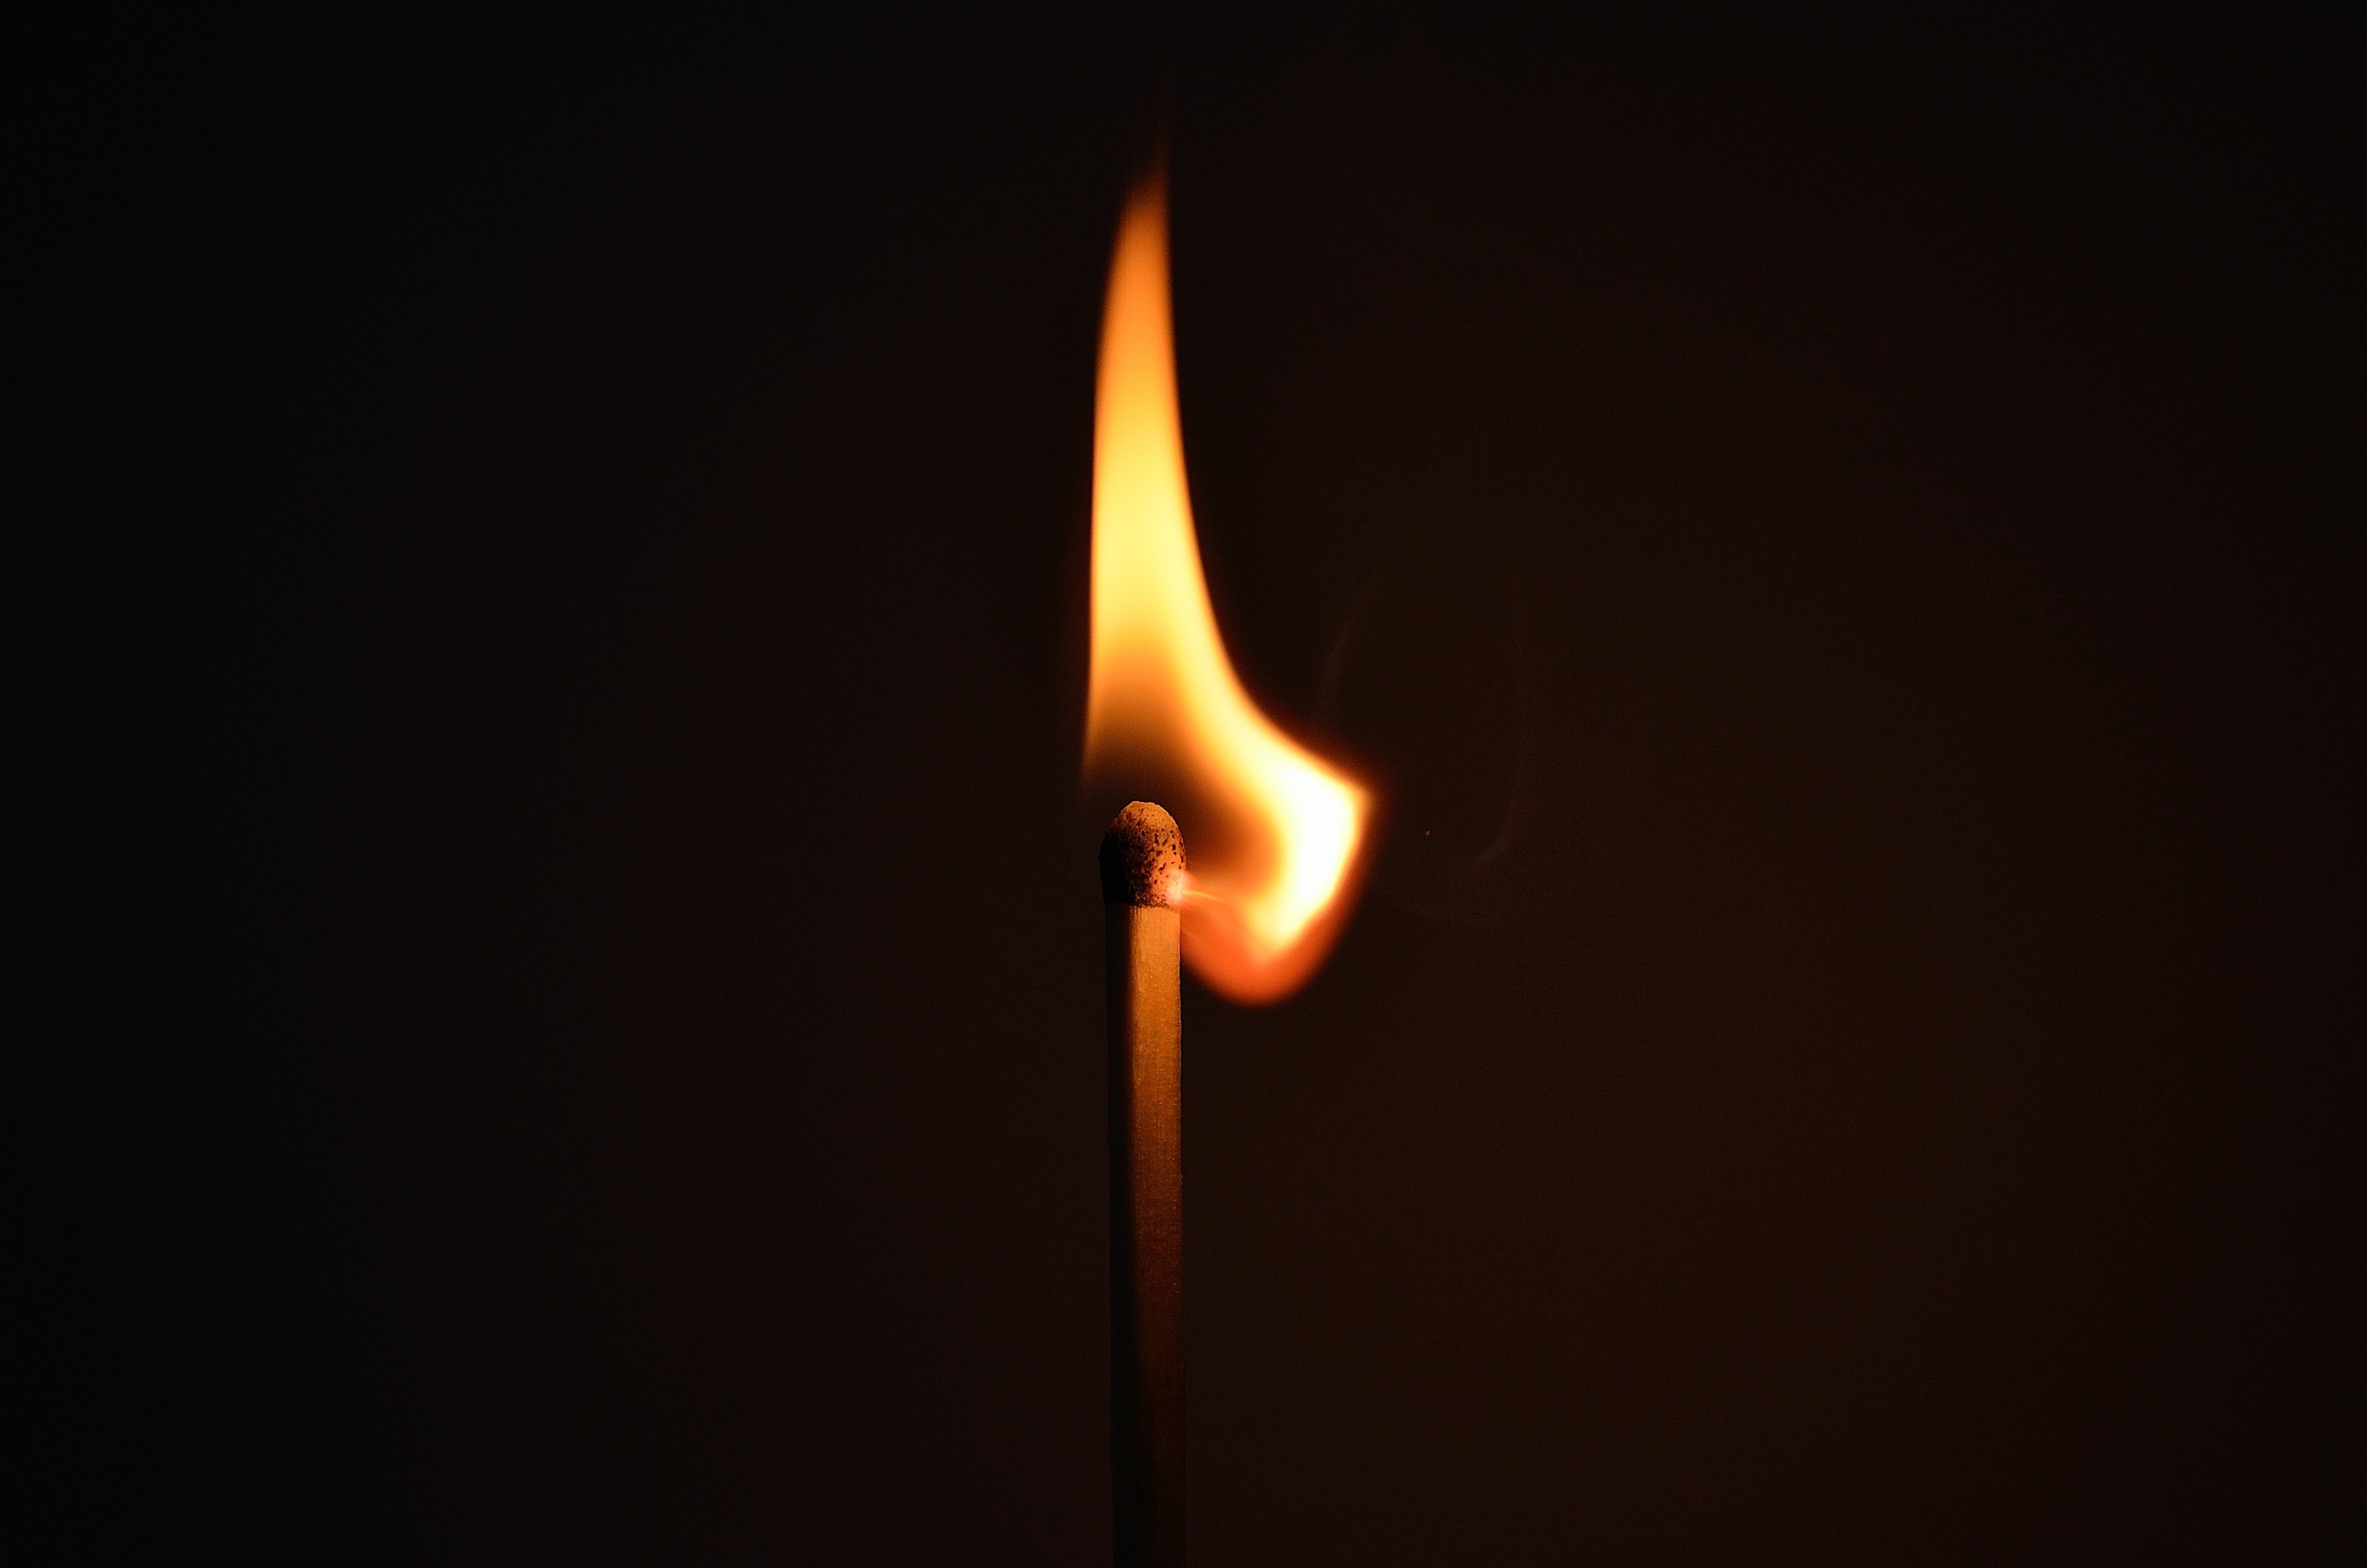 awesome mac wallpapers,flame,fire,heat,match,darkness